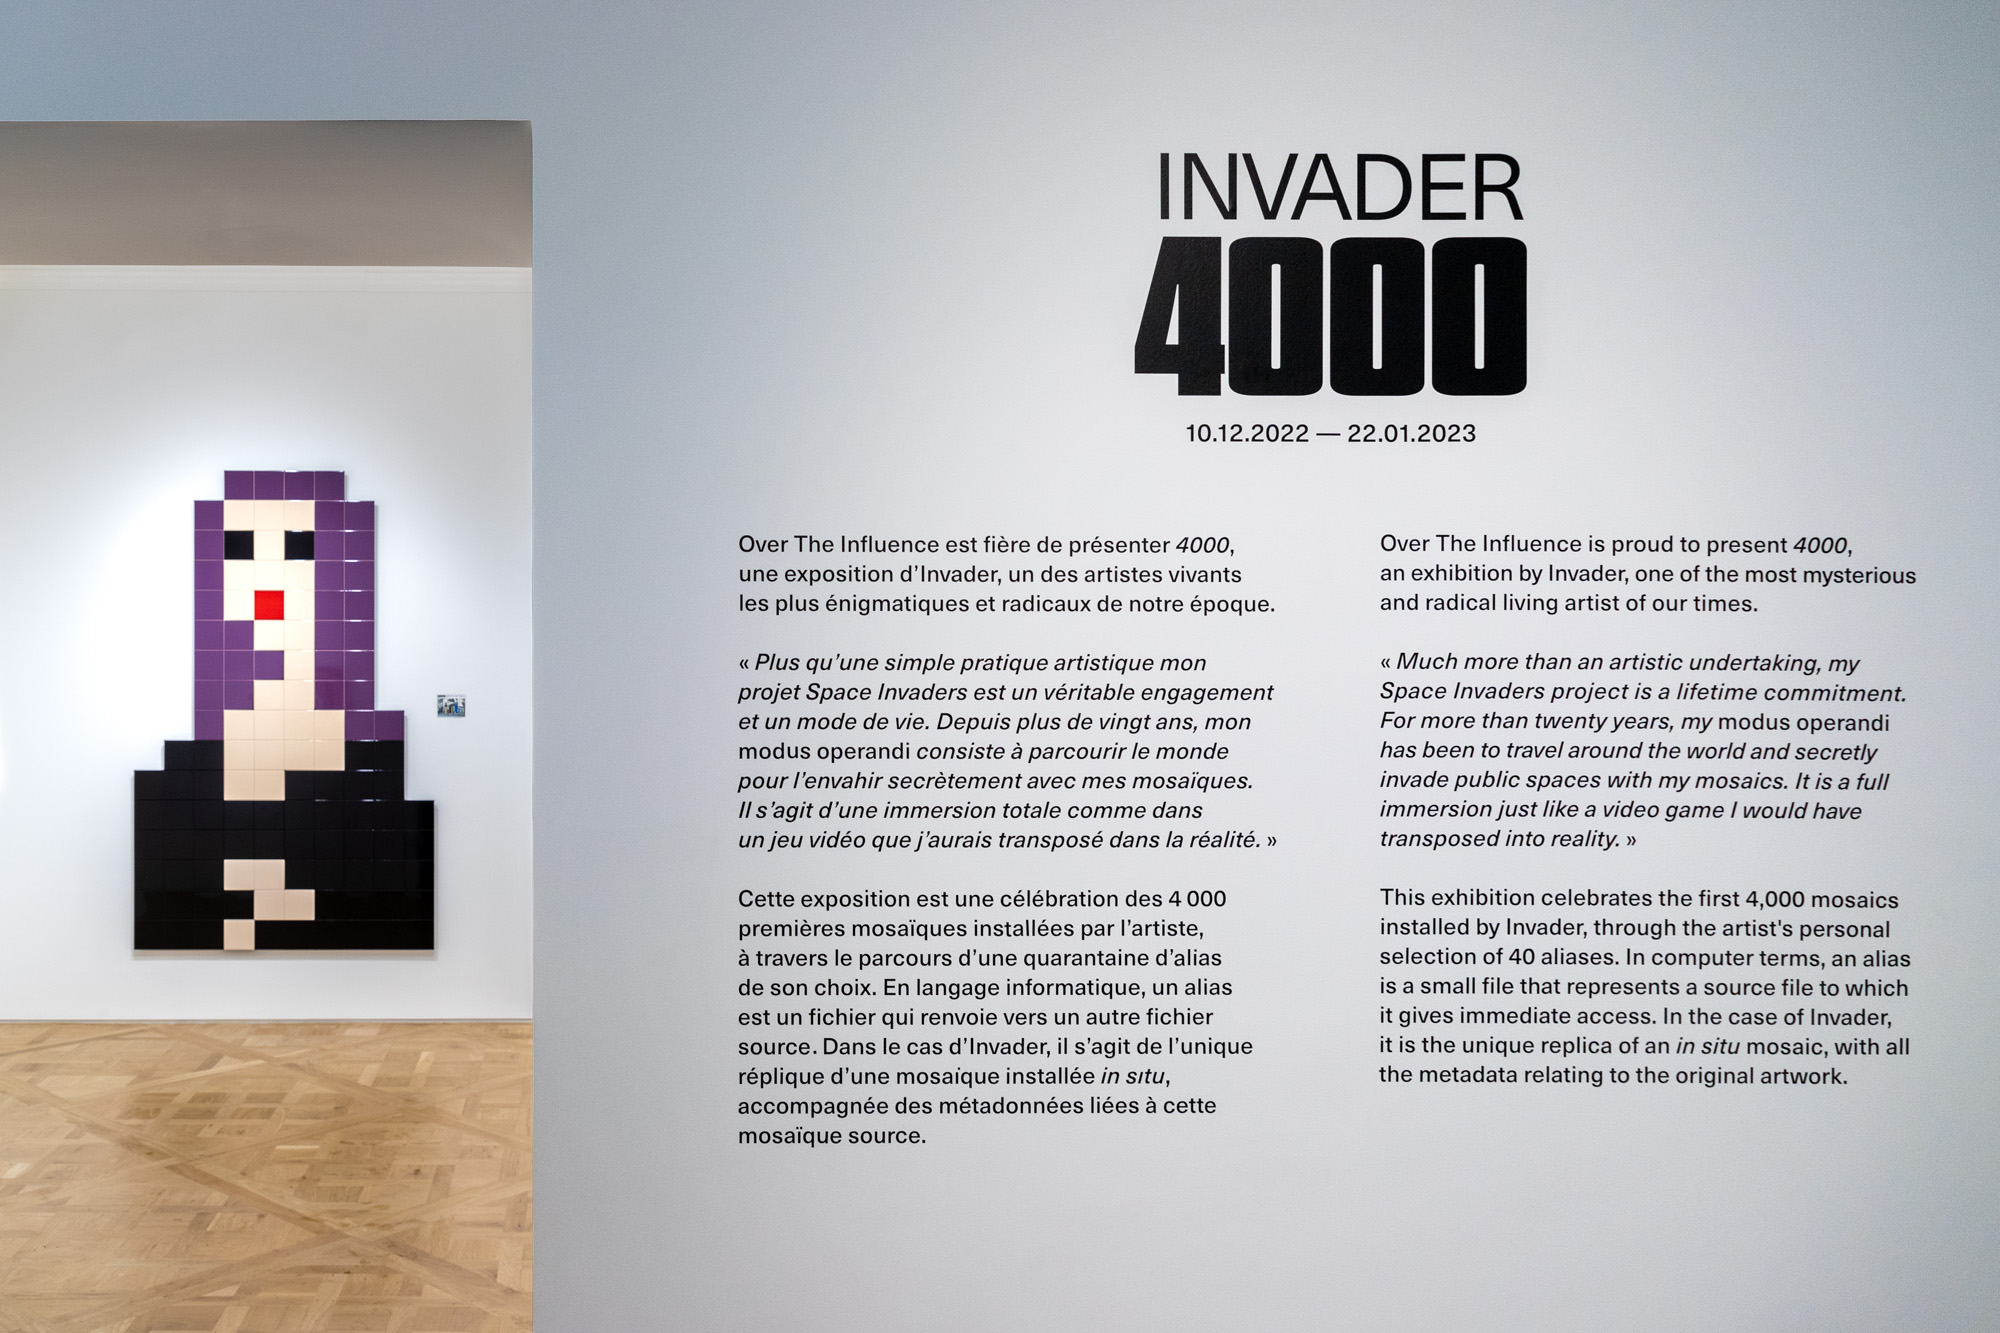 4000 - Invader - Over the Influence